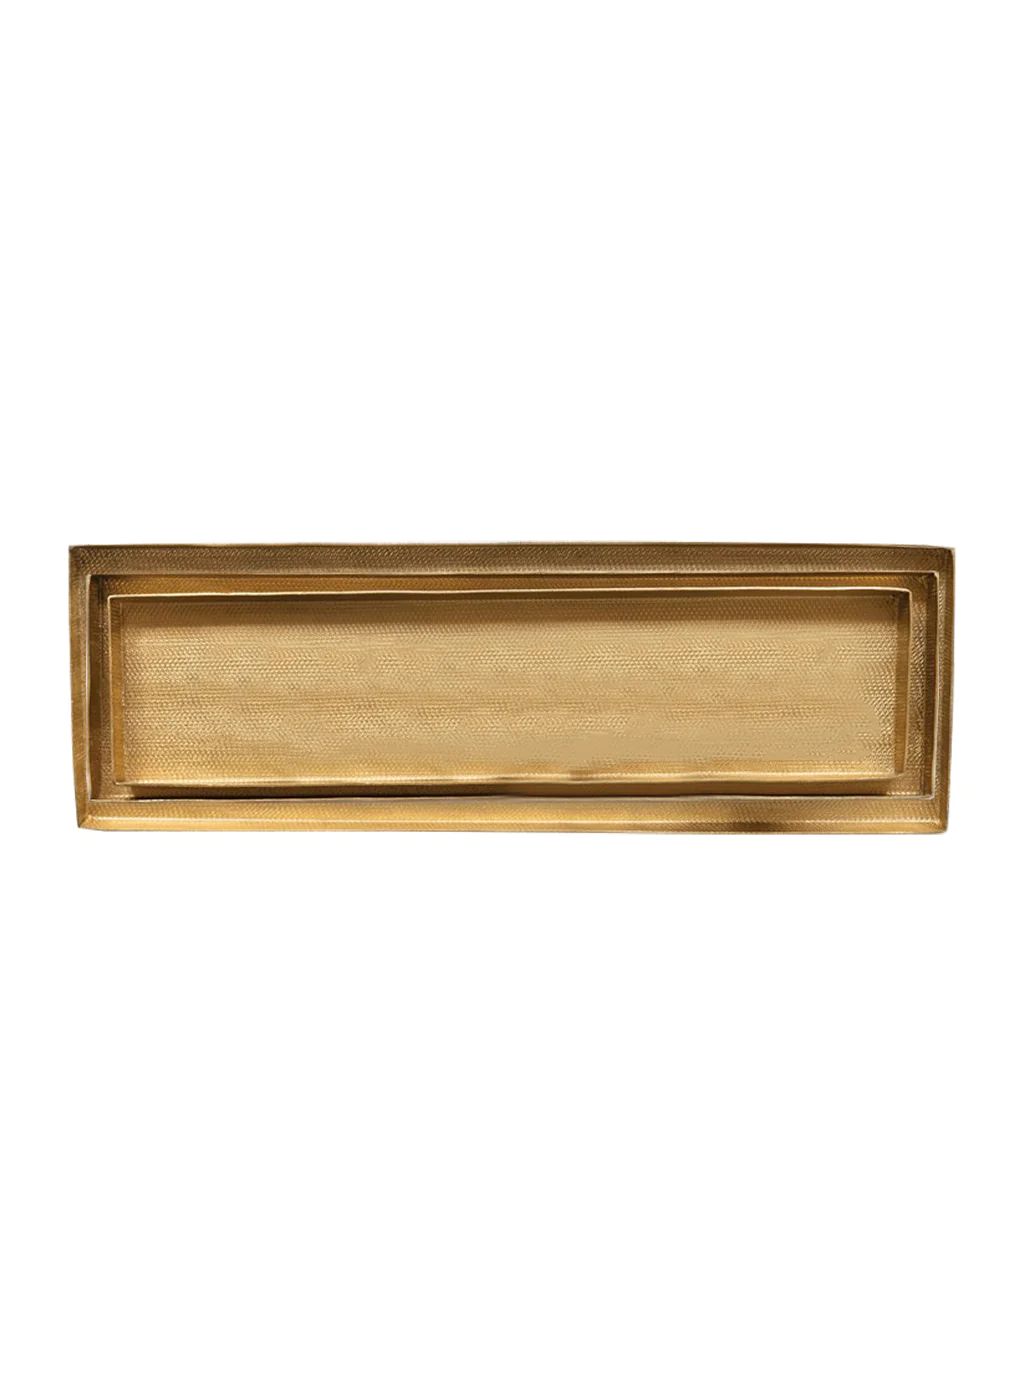 Brass Nesting Trays | Set of 3 | House of Jade Home